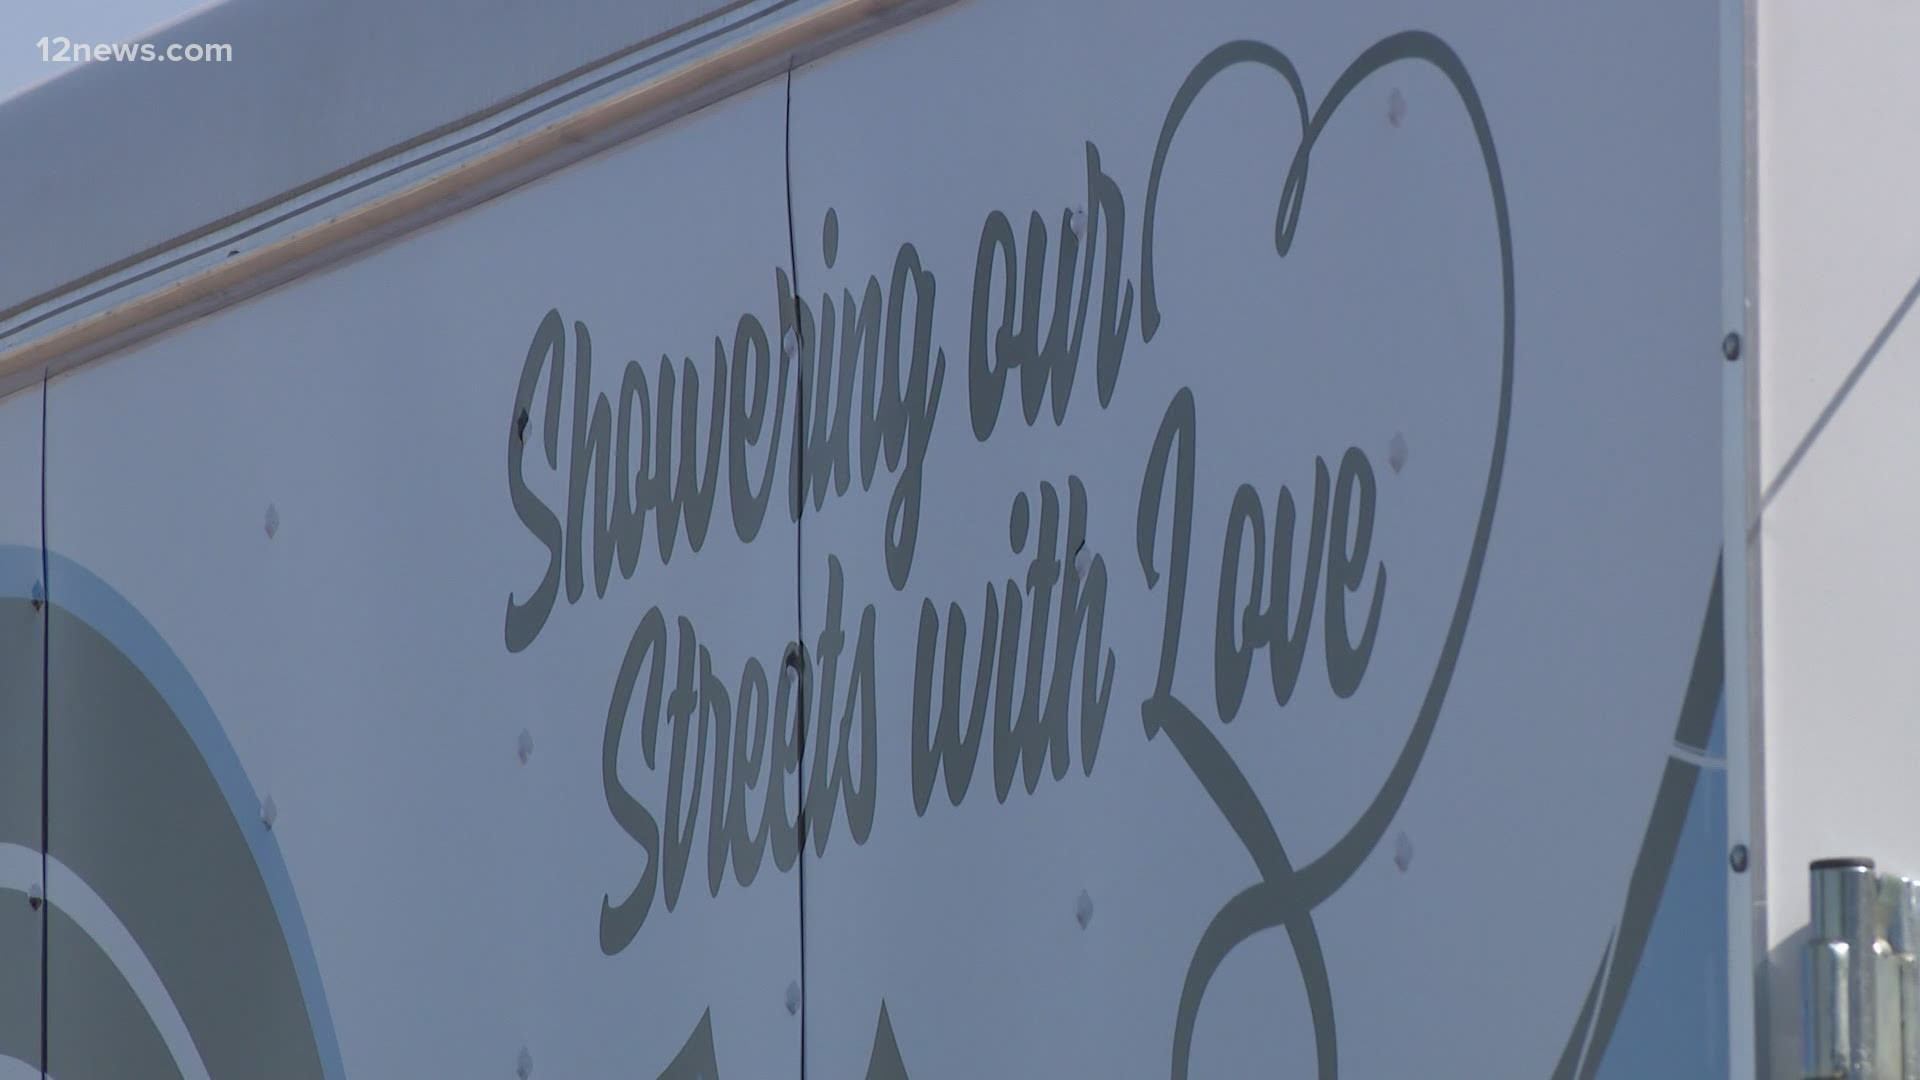 Cloud Covered Streets is hitting the road to help homeless people in the Valley get a fresh start. Team 12's Jen Wahl has the latest.